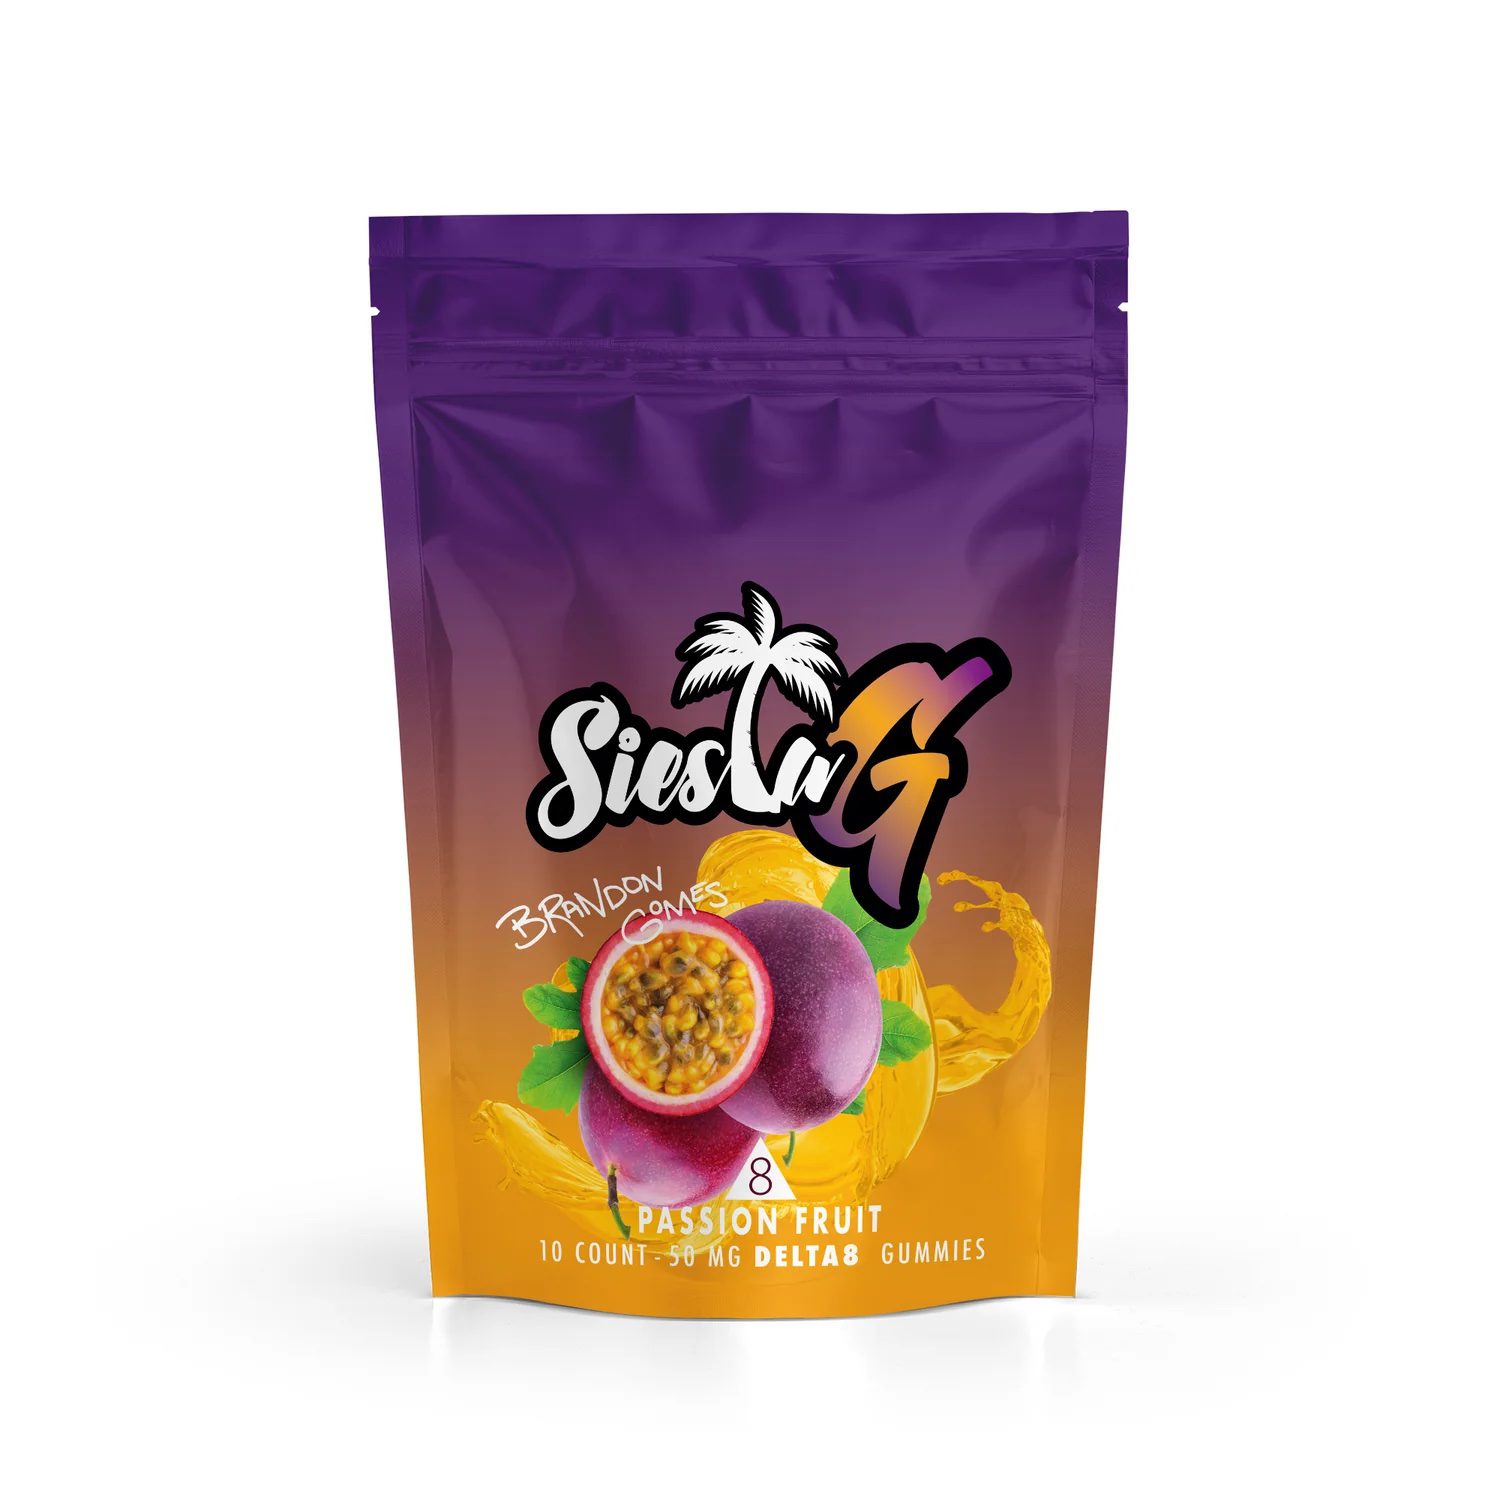 SiestaG Delta8 Gummies 50mg 10 count Passion Fruit (500mg)